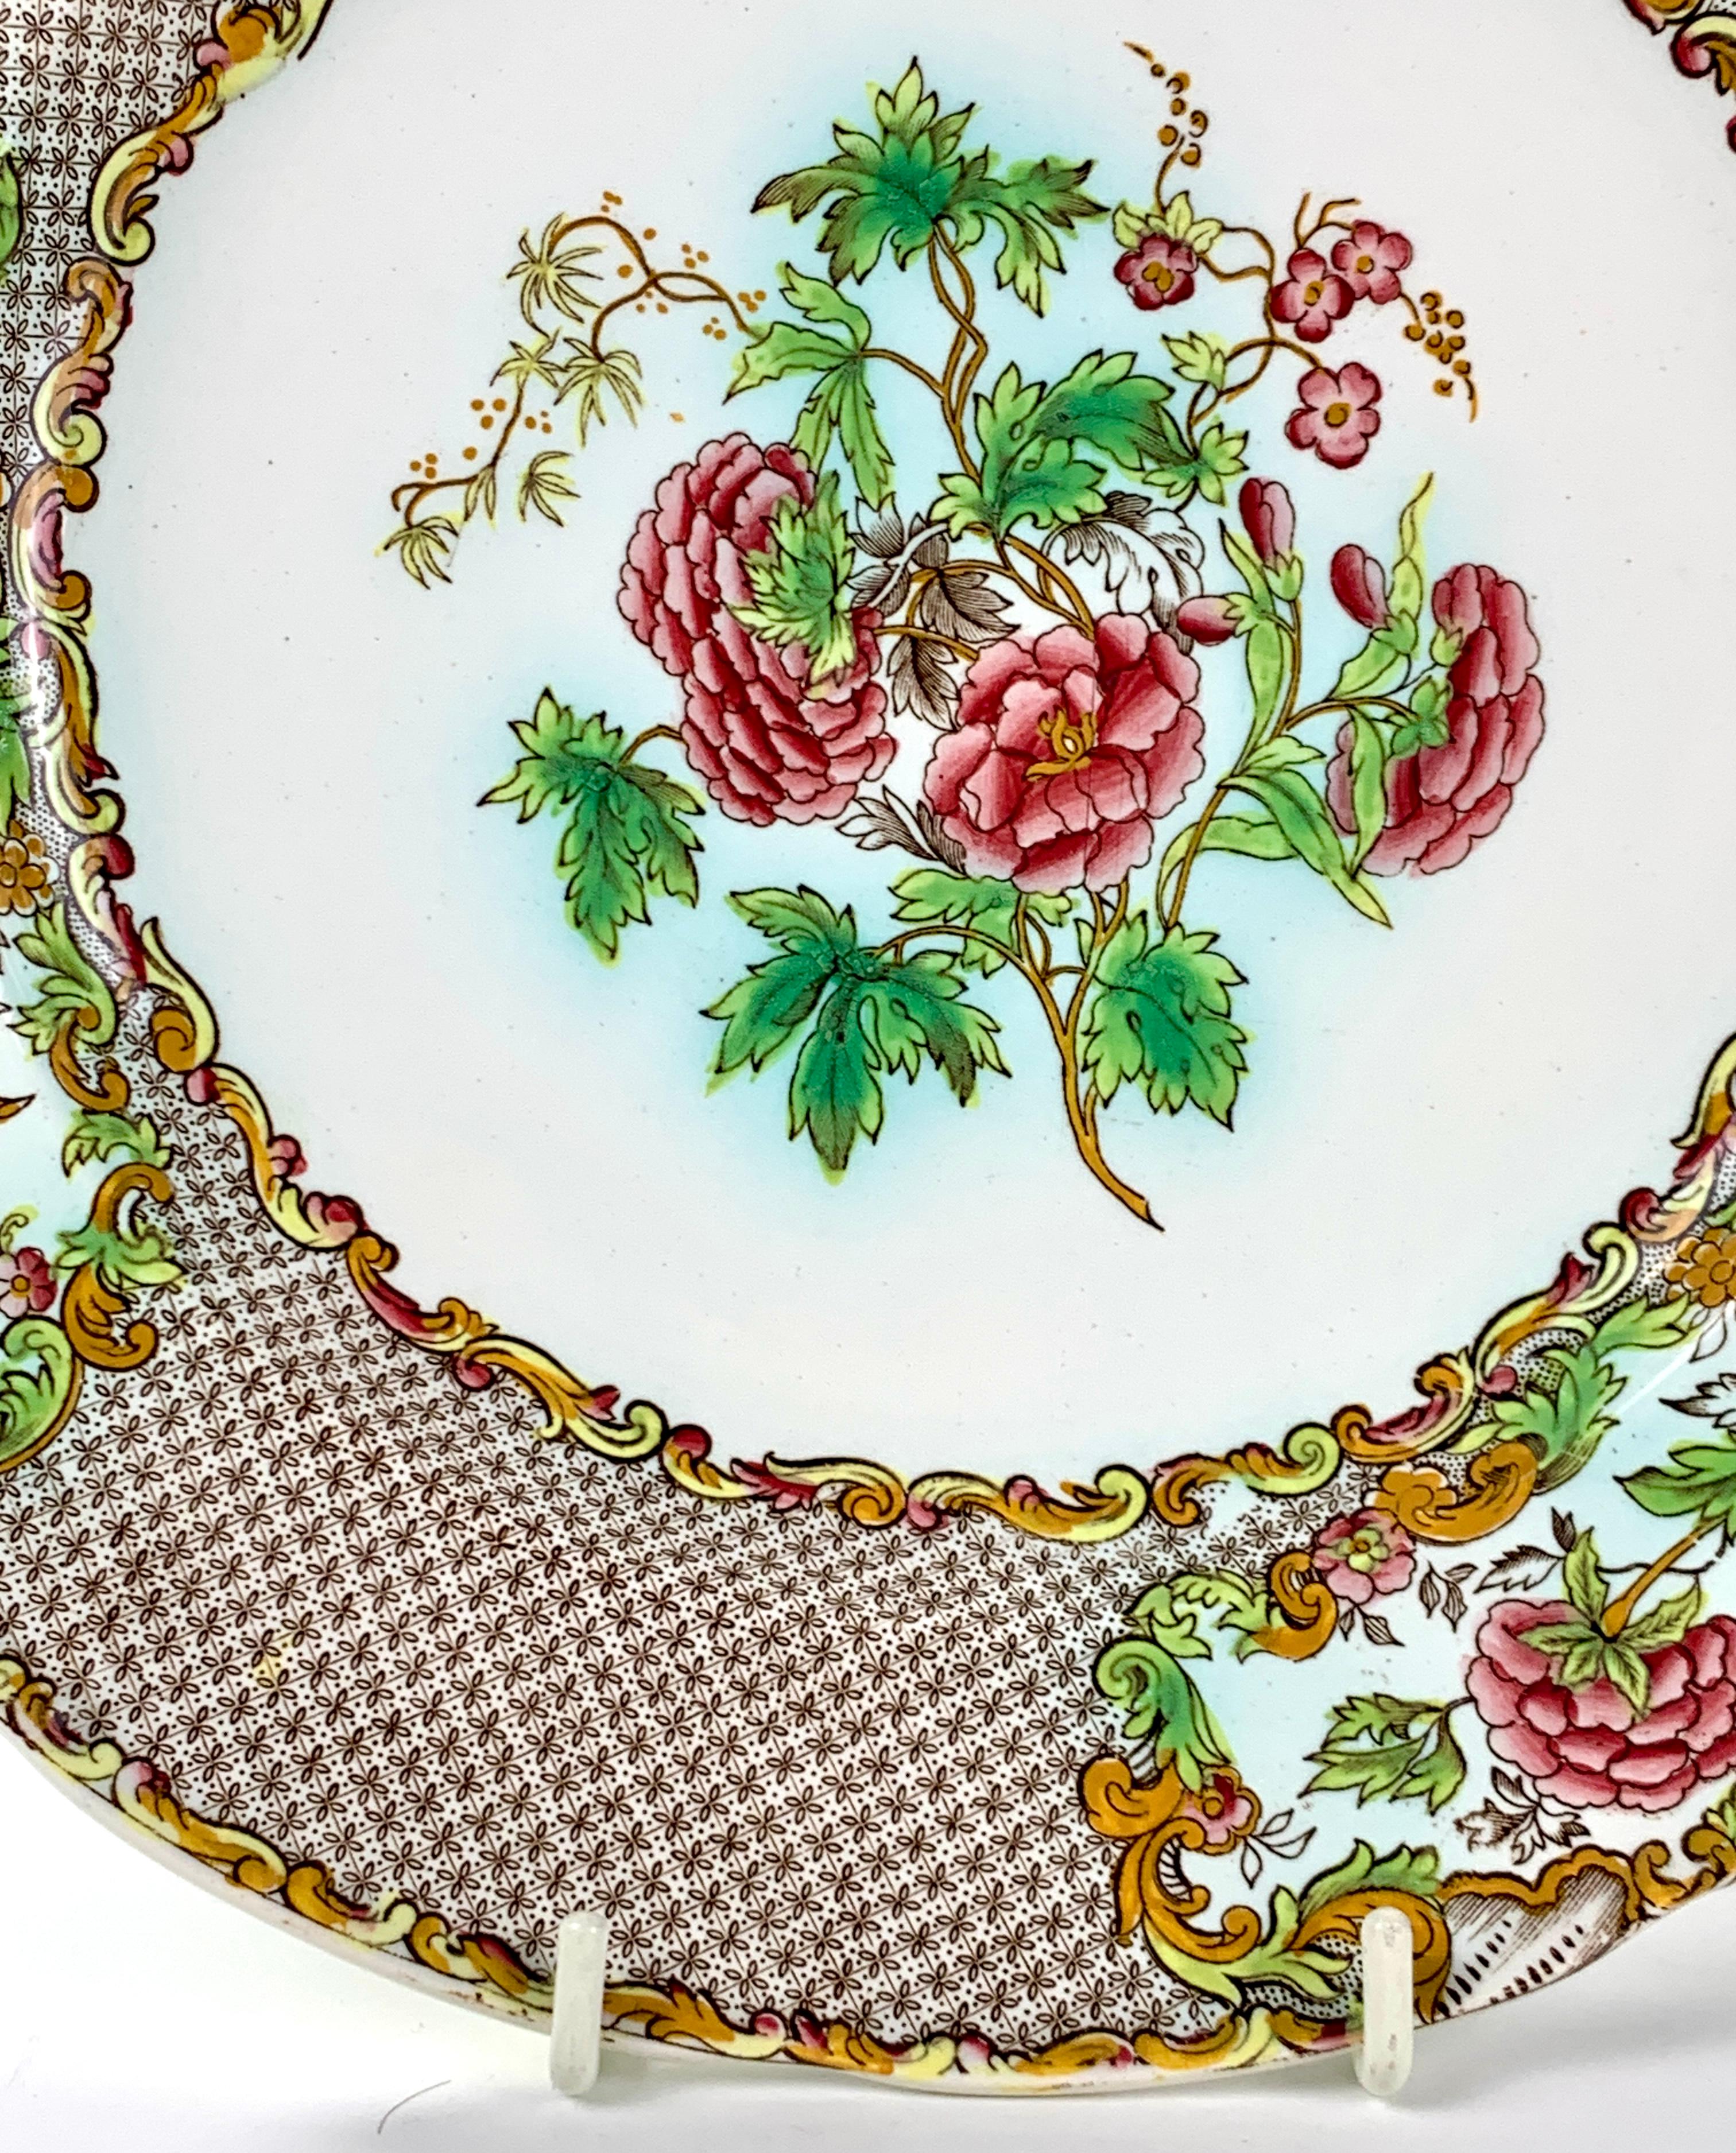 Dozen Antique Spode Dinner Plates with Pink Roses and Green Leaves Border C-1837 For Sale 2